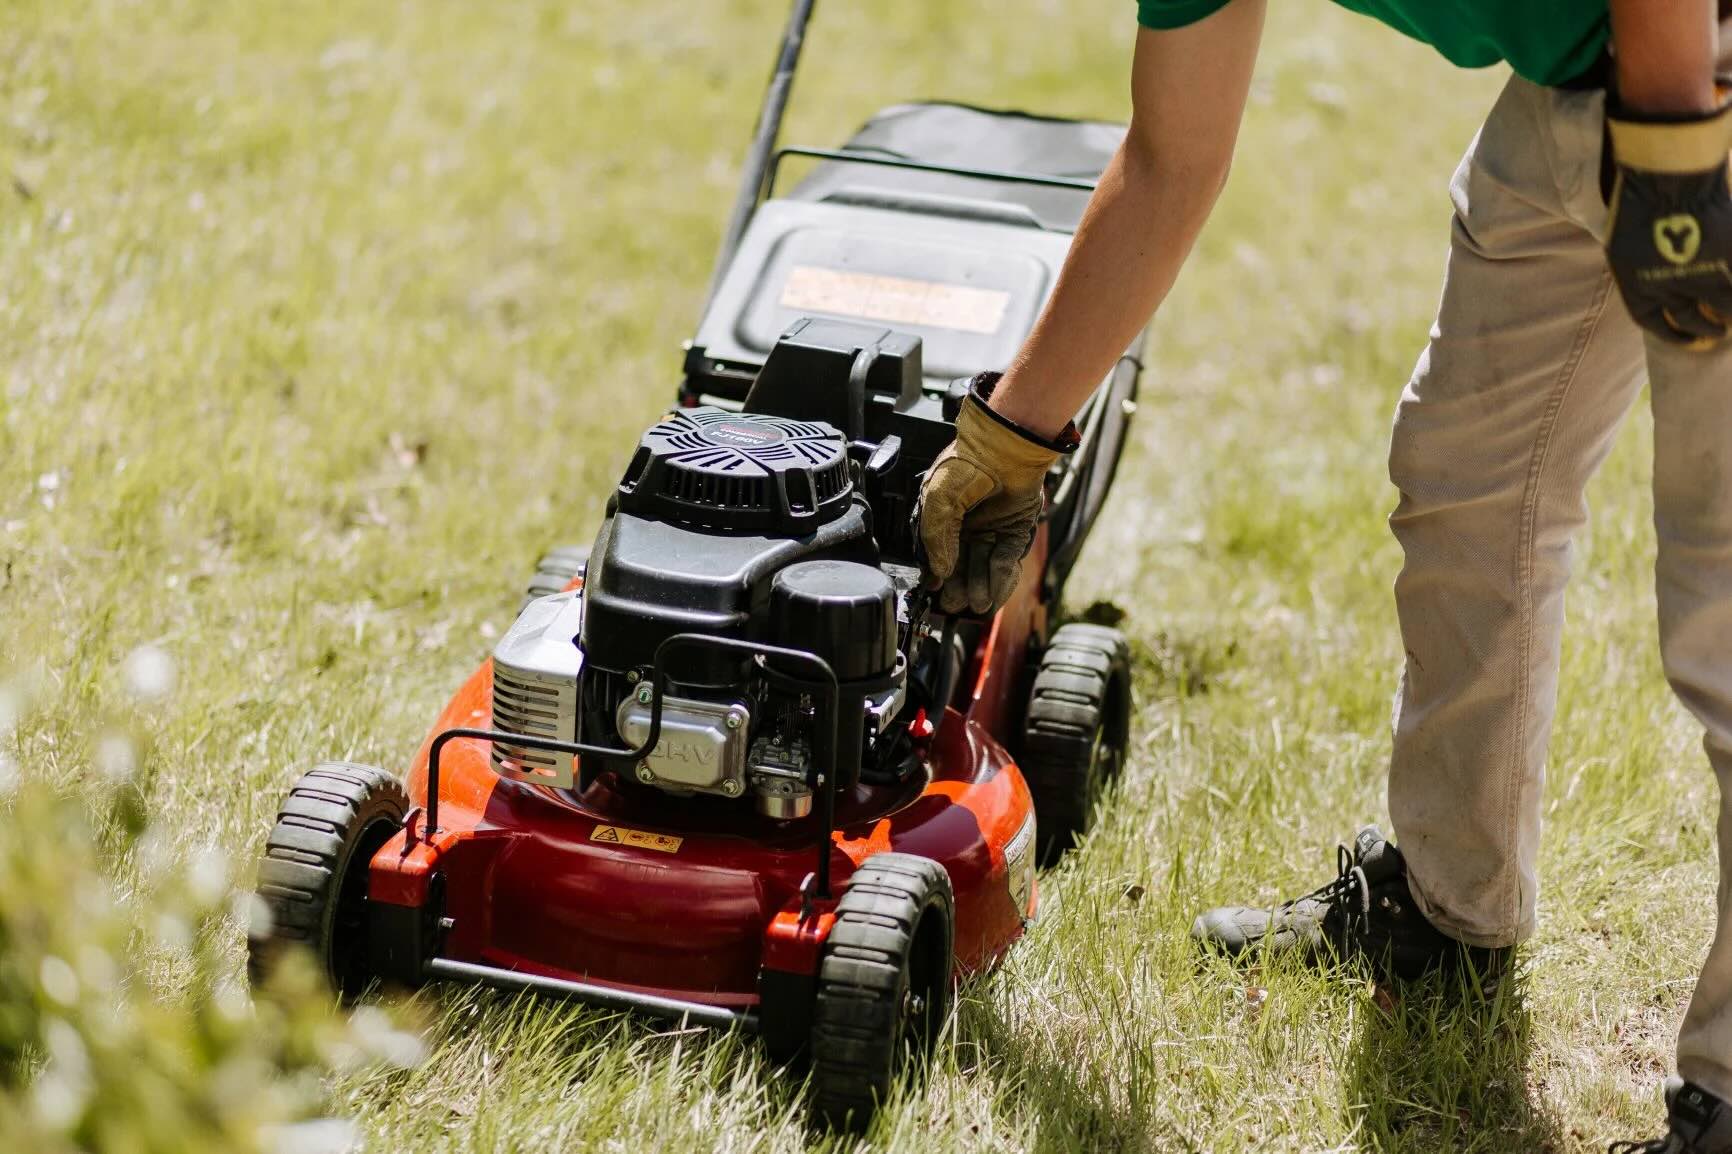 How To Remove Gas From A Lawnmower